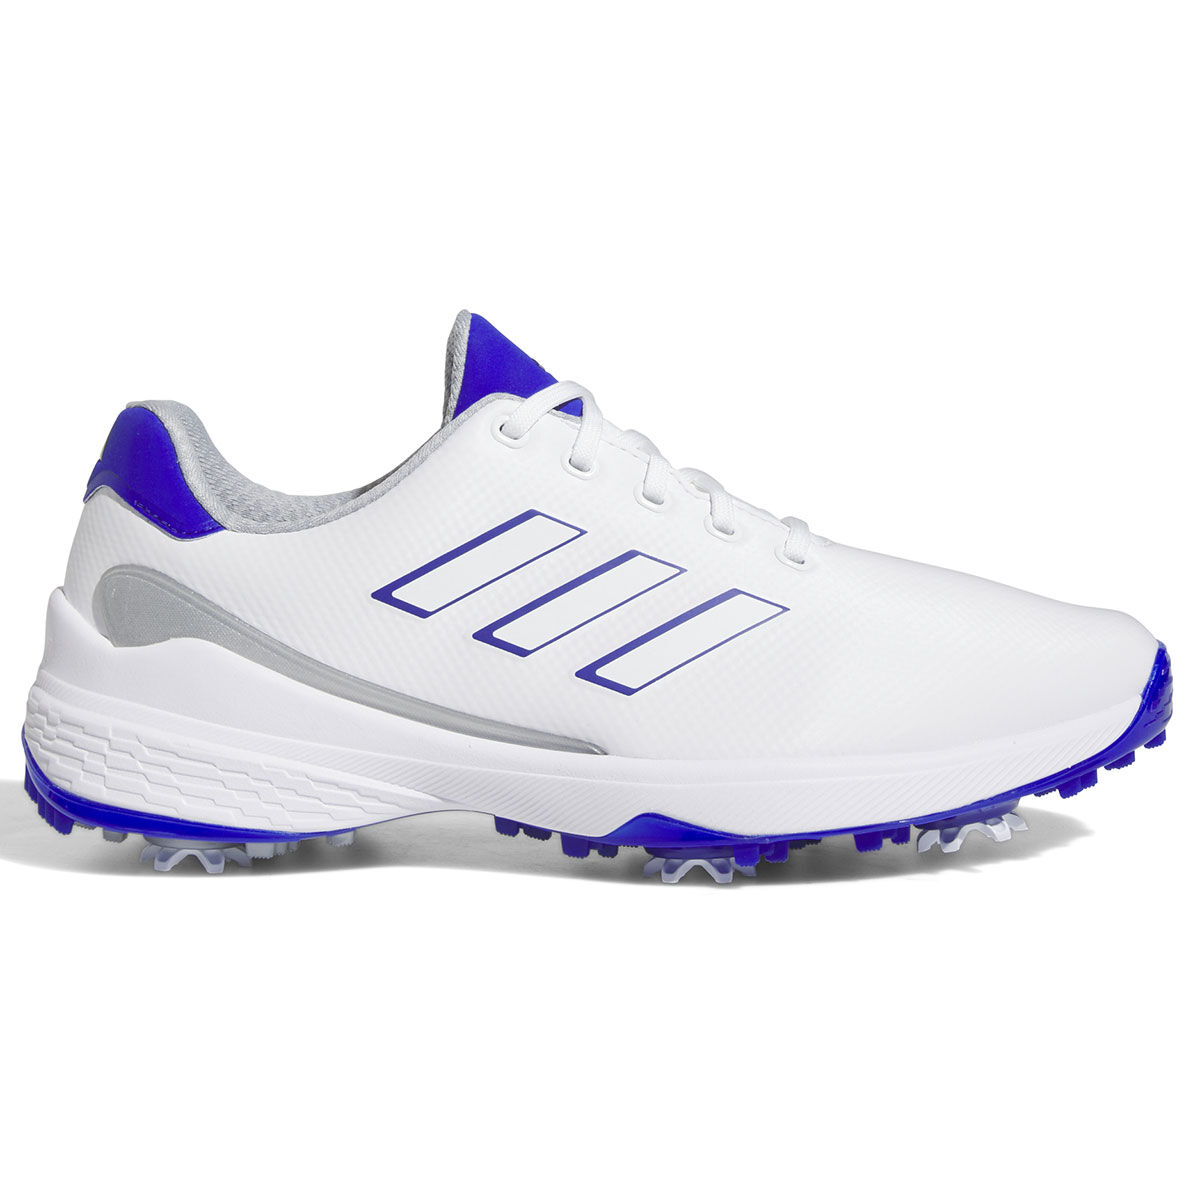 adidas Men’s ZG23 Waterproof Spiked Golf Shoes, Mens, White/blue fusion/lucid blue, 8 | American Golf